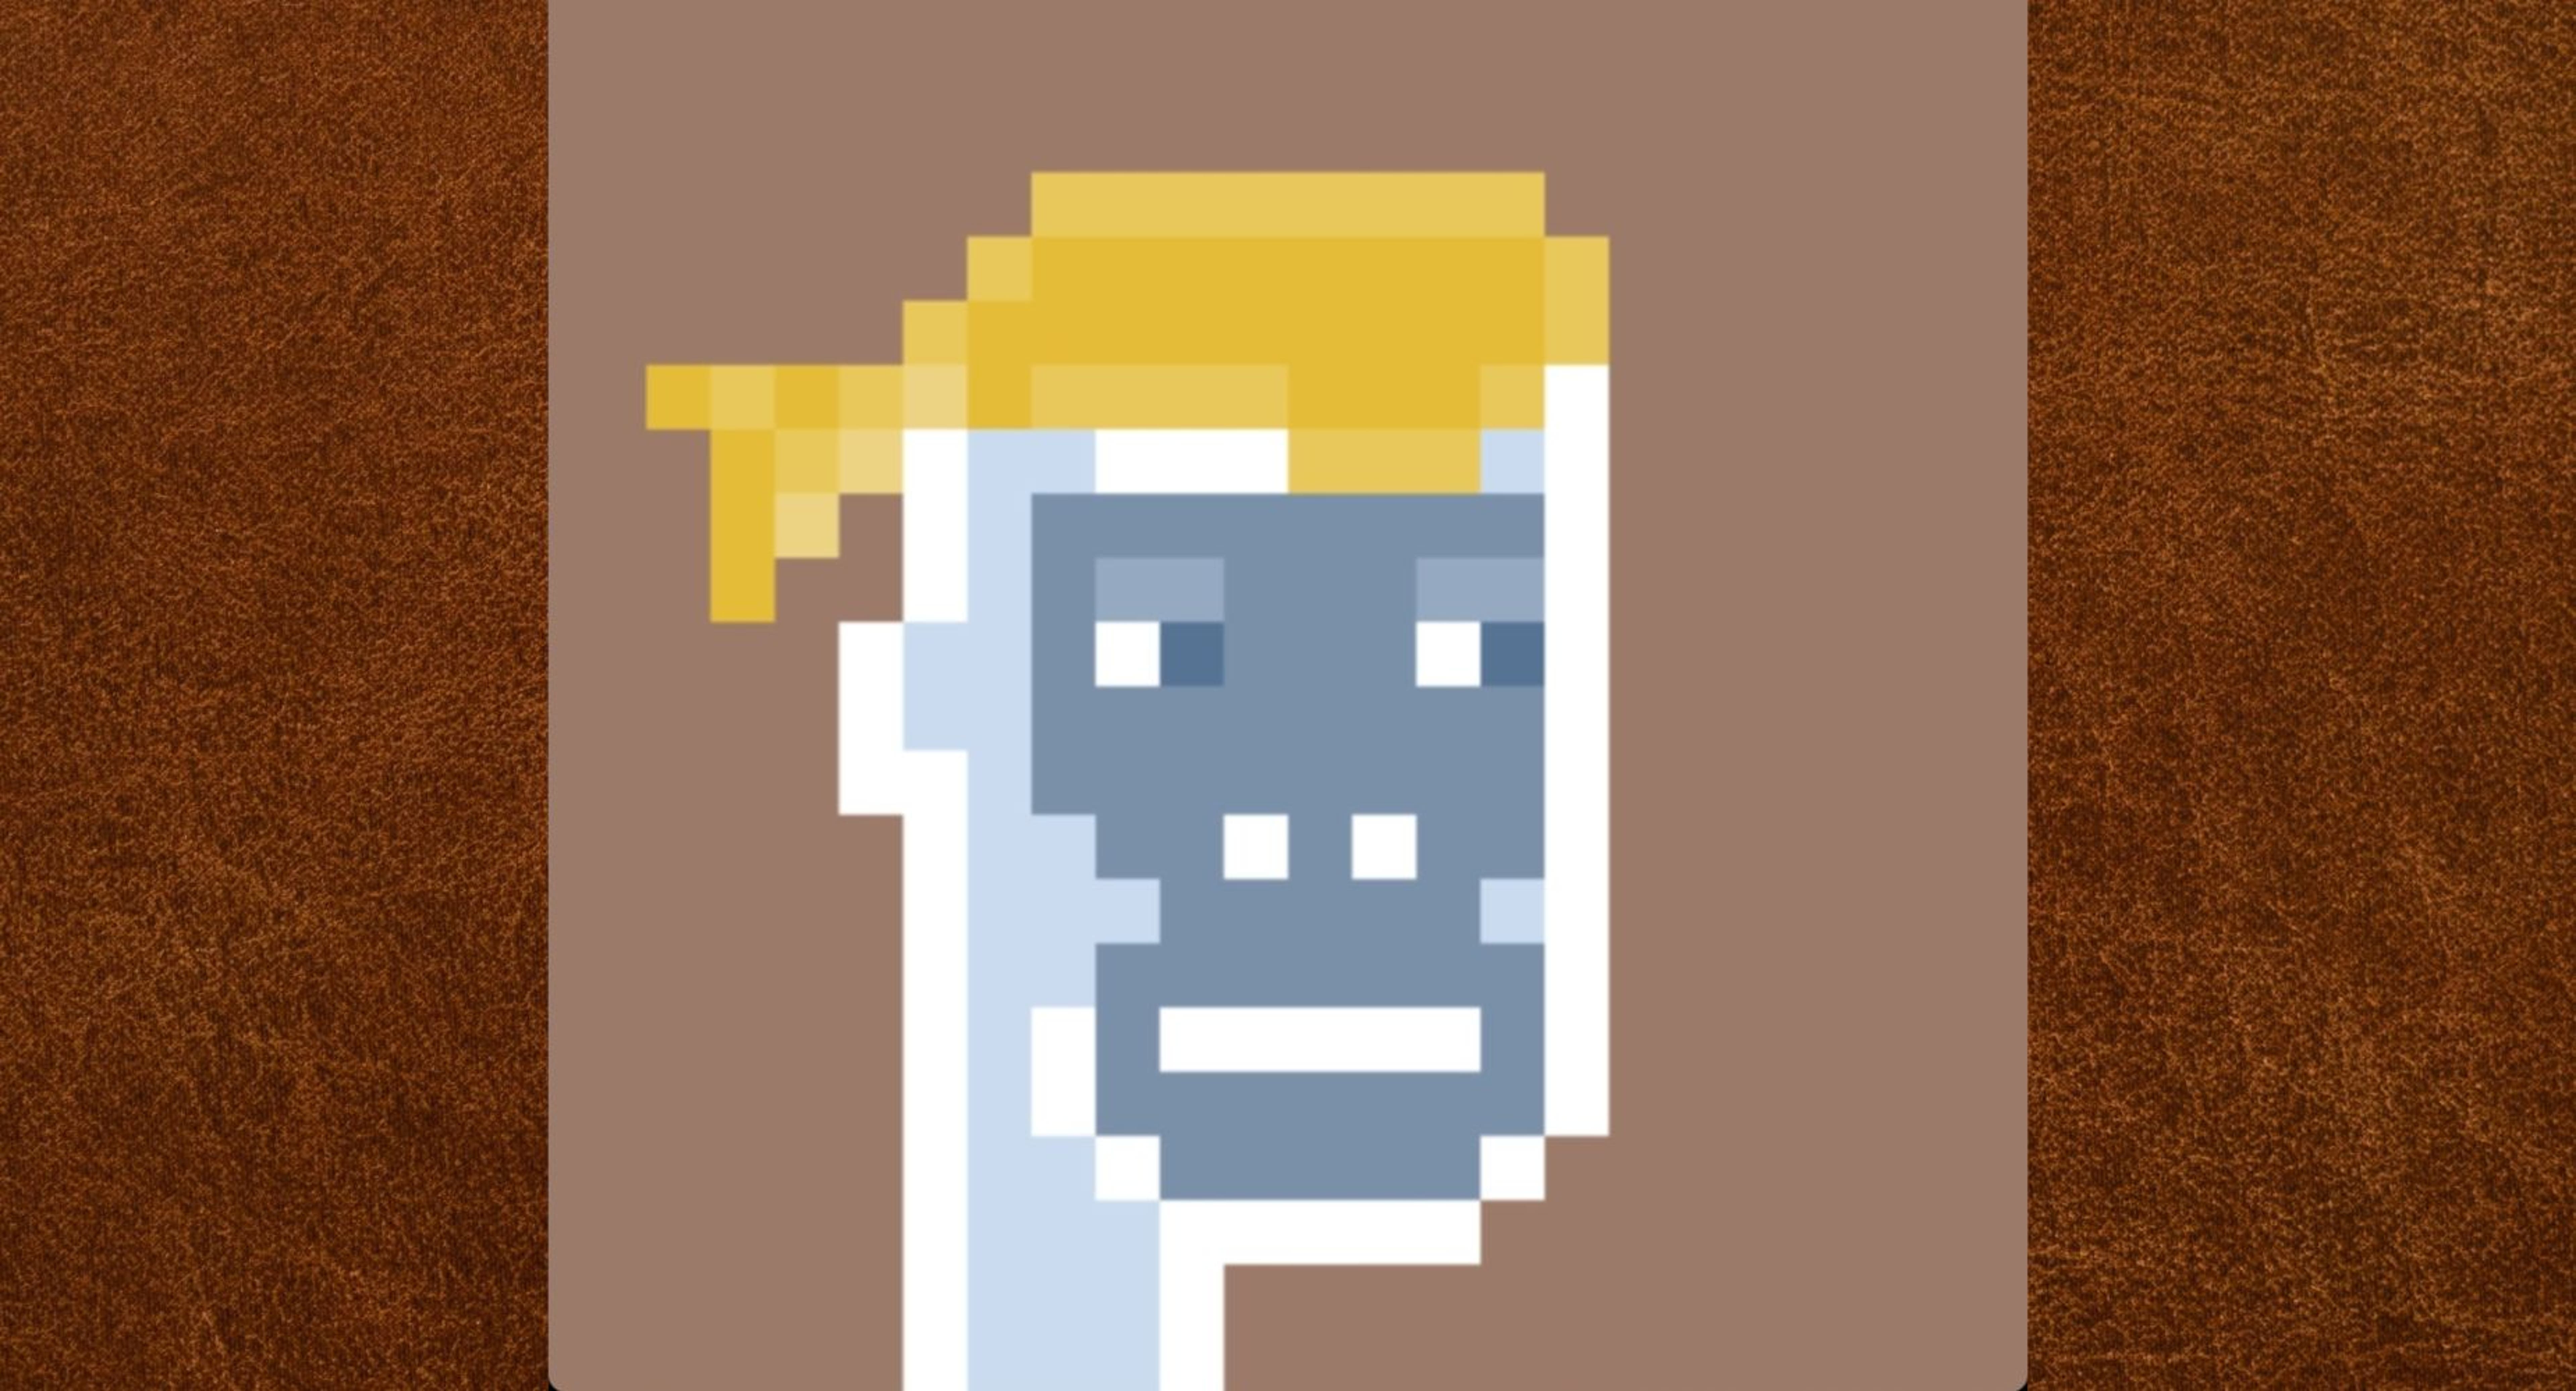 CryptoPunks NFT Owner Sells For $7M Loss, But There May Be Some Upside